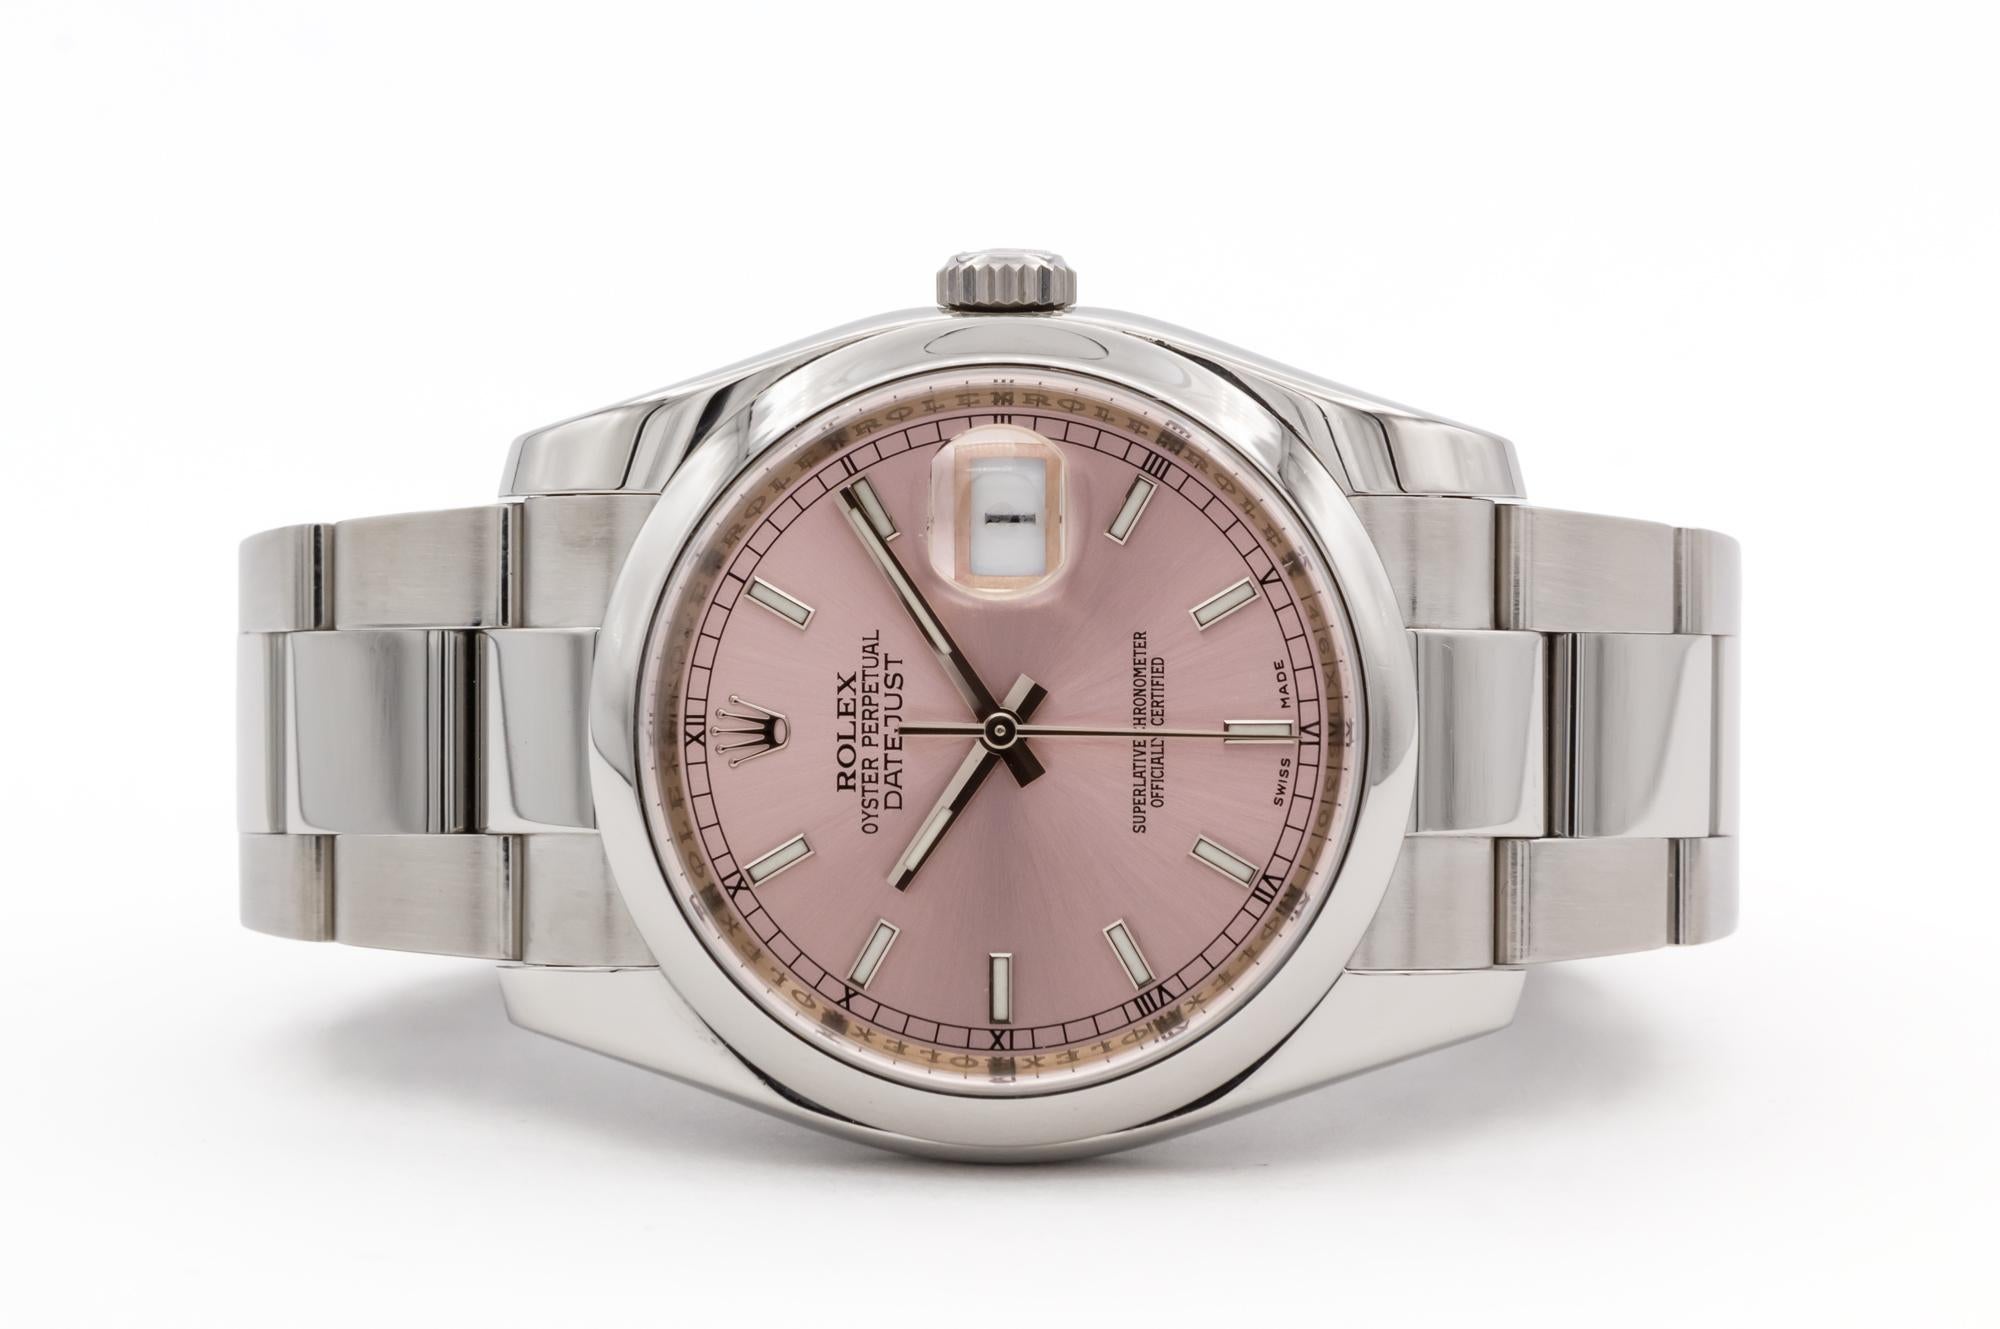 We are pleased to offer this Rolex Stainless Steel Datejust 116200. This classic Rolex Datejust features a 36mm stainless steel case, stainless steel smooth bezel, rare and discontinued Rolex Original pink stick dial, engraved inner bezel and